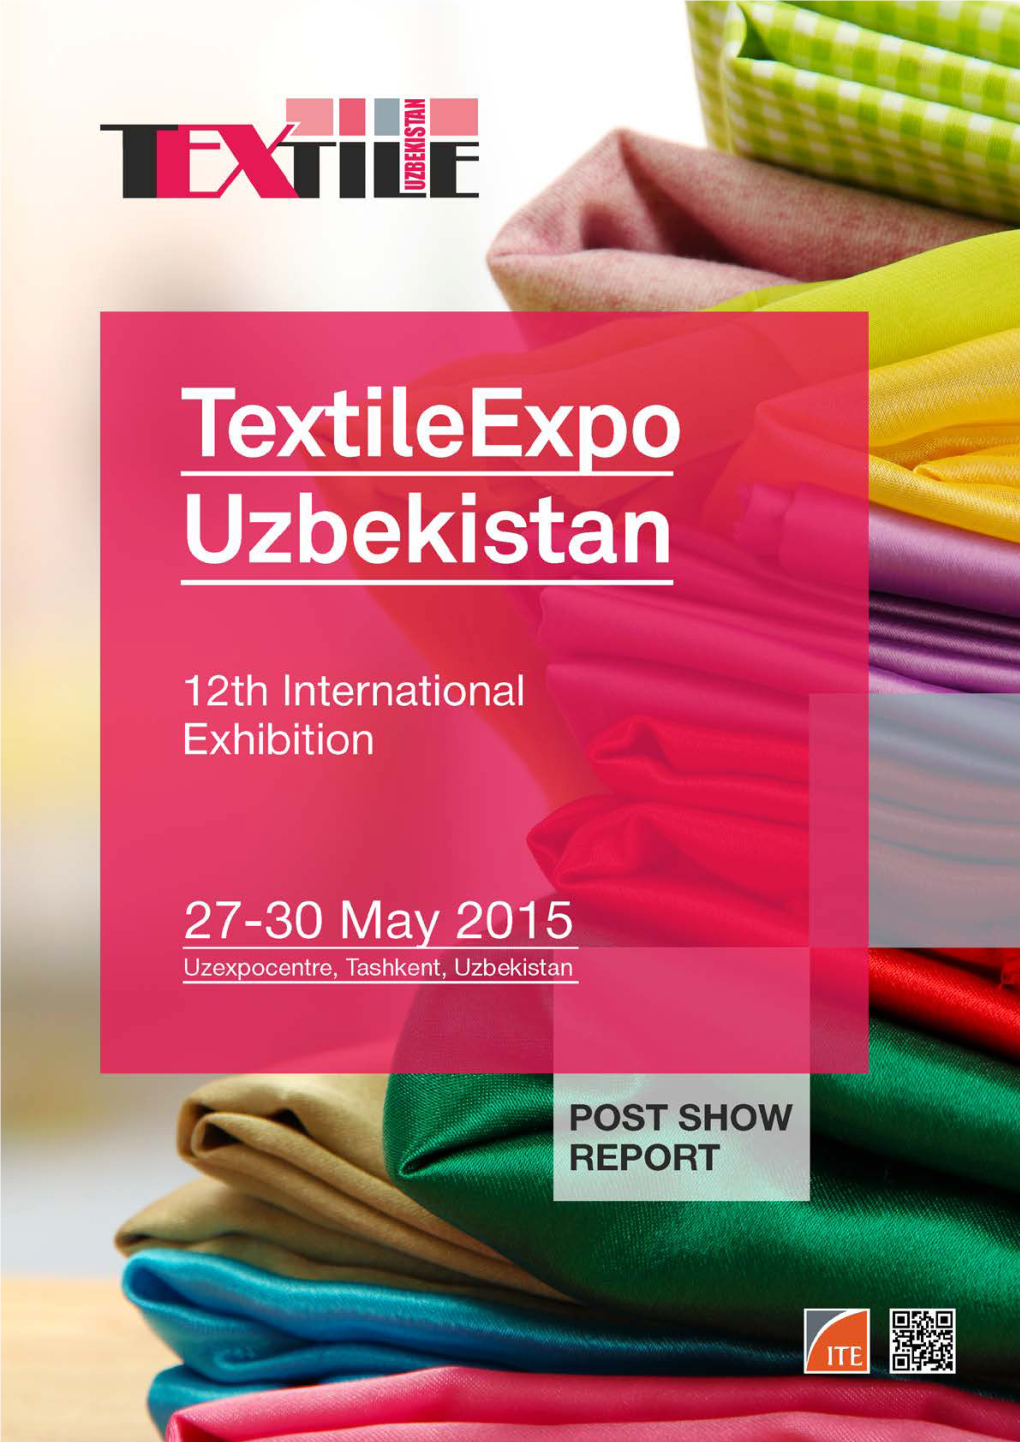 40% of All Exhibitors Were International, from Countries Such As Belarus, India, Indonesia, China, Latvia, Lithuania, Poland, Turkey, Uzbekistan and Japan